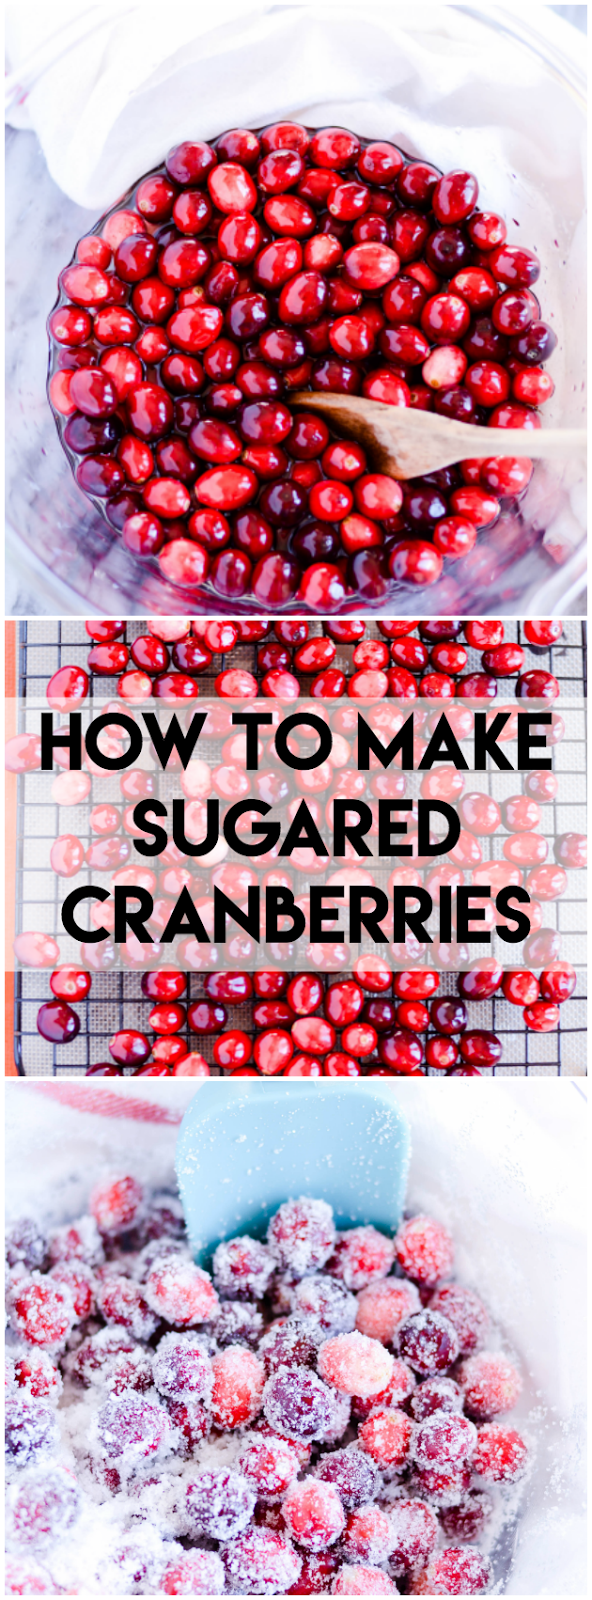 These sweet cranberries are as easy to make as they are beautiful. The perfect topping for a beautiful holiday cake or drink, or even to serve as an appetizer.